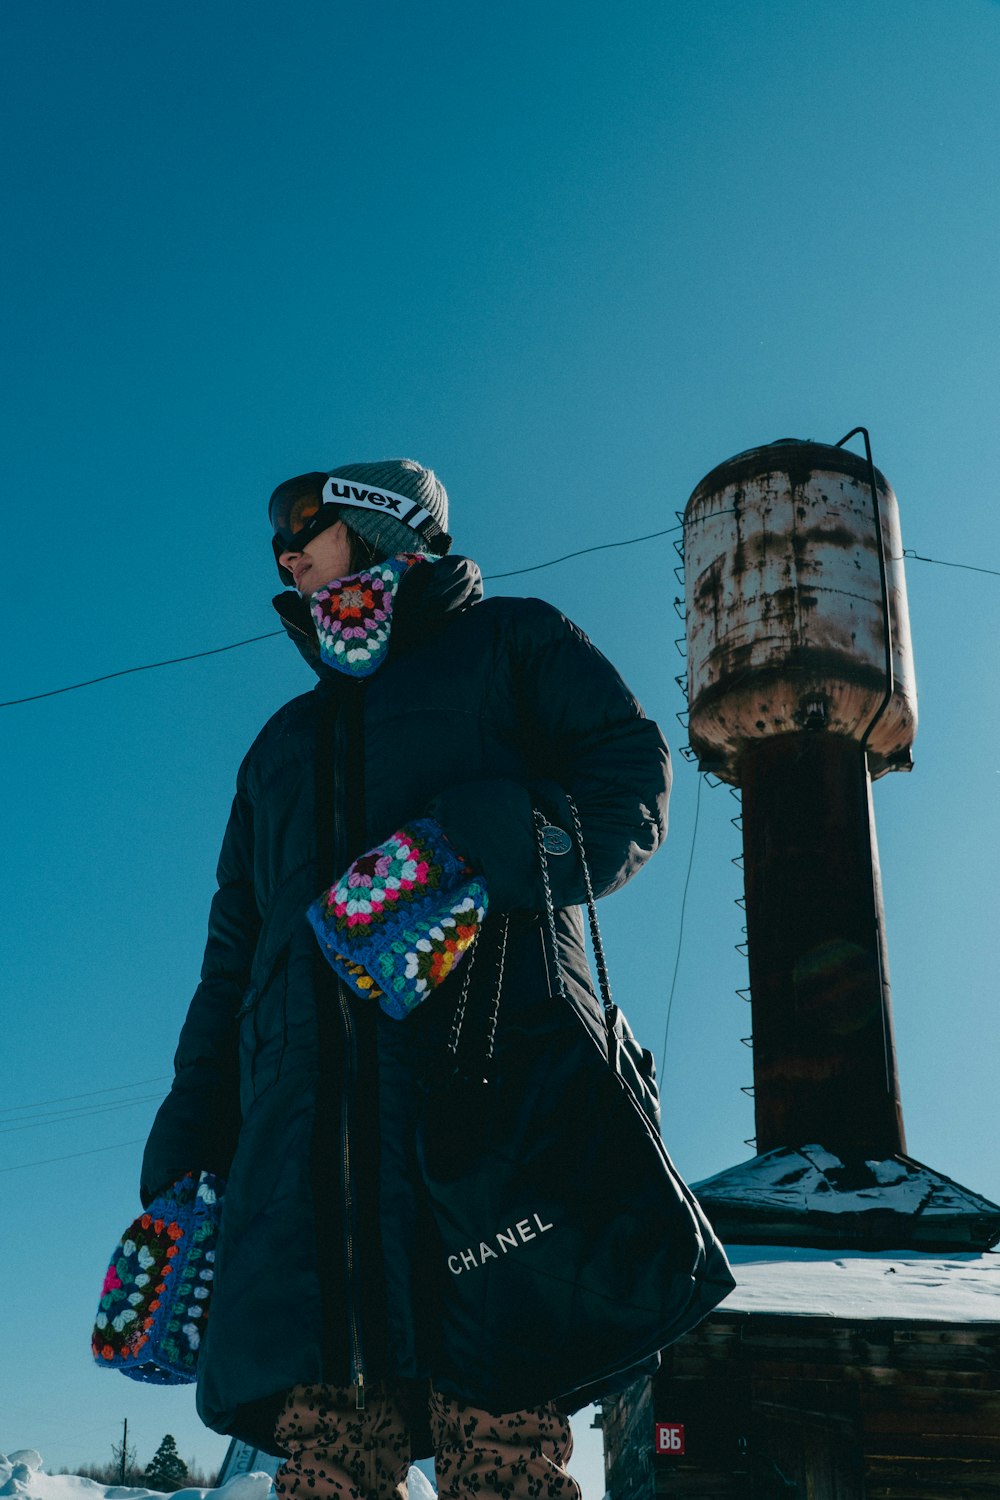 a snowboarder in a black jacket carrying a bag